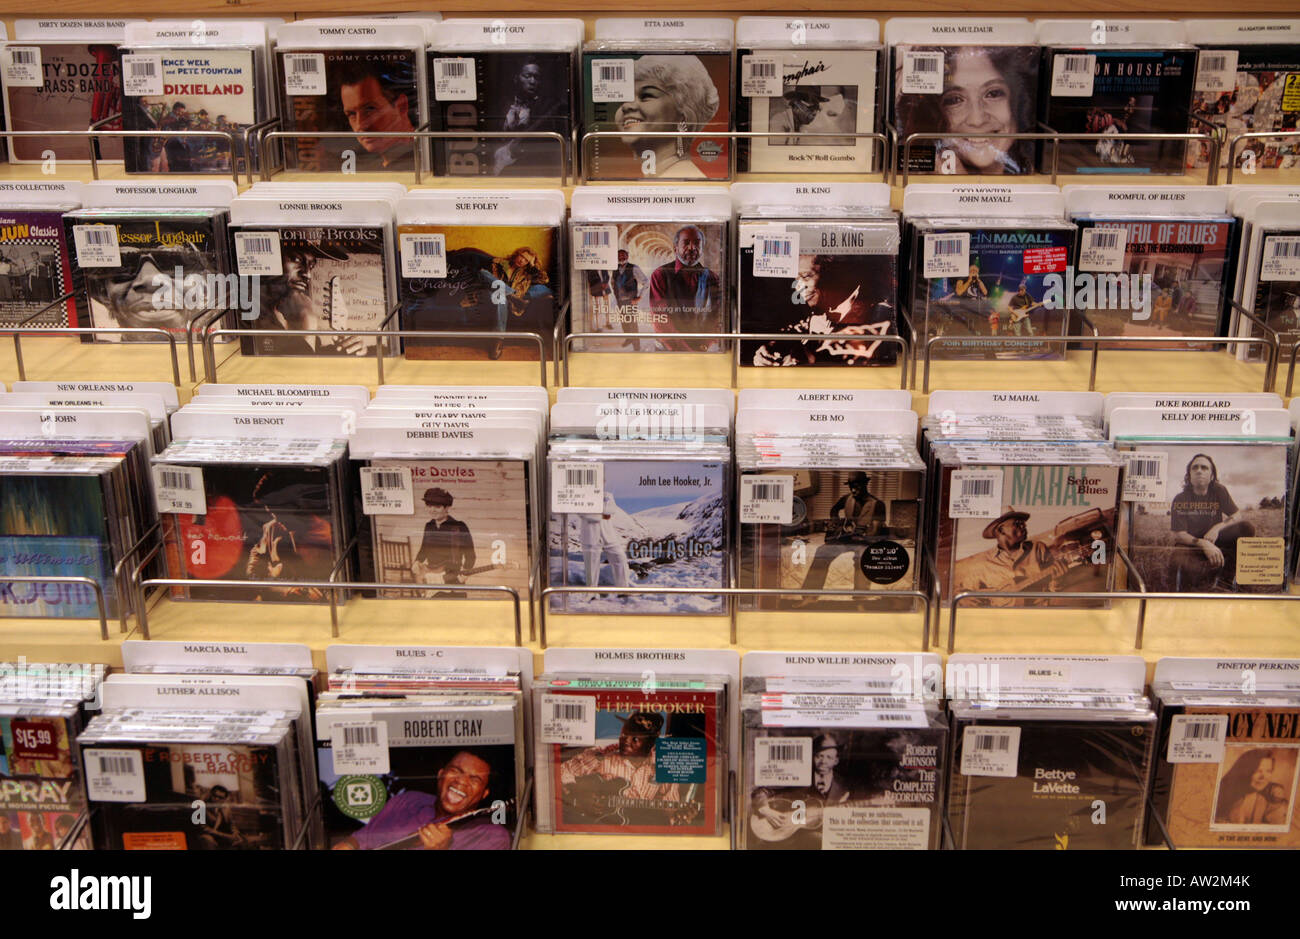 Rows of music CDs for sale Stock Photo - Alamy